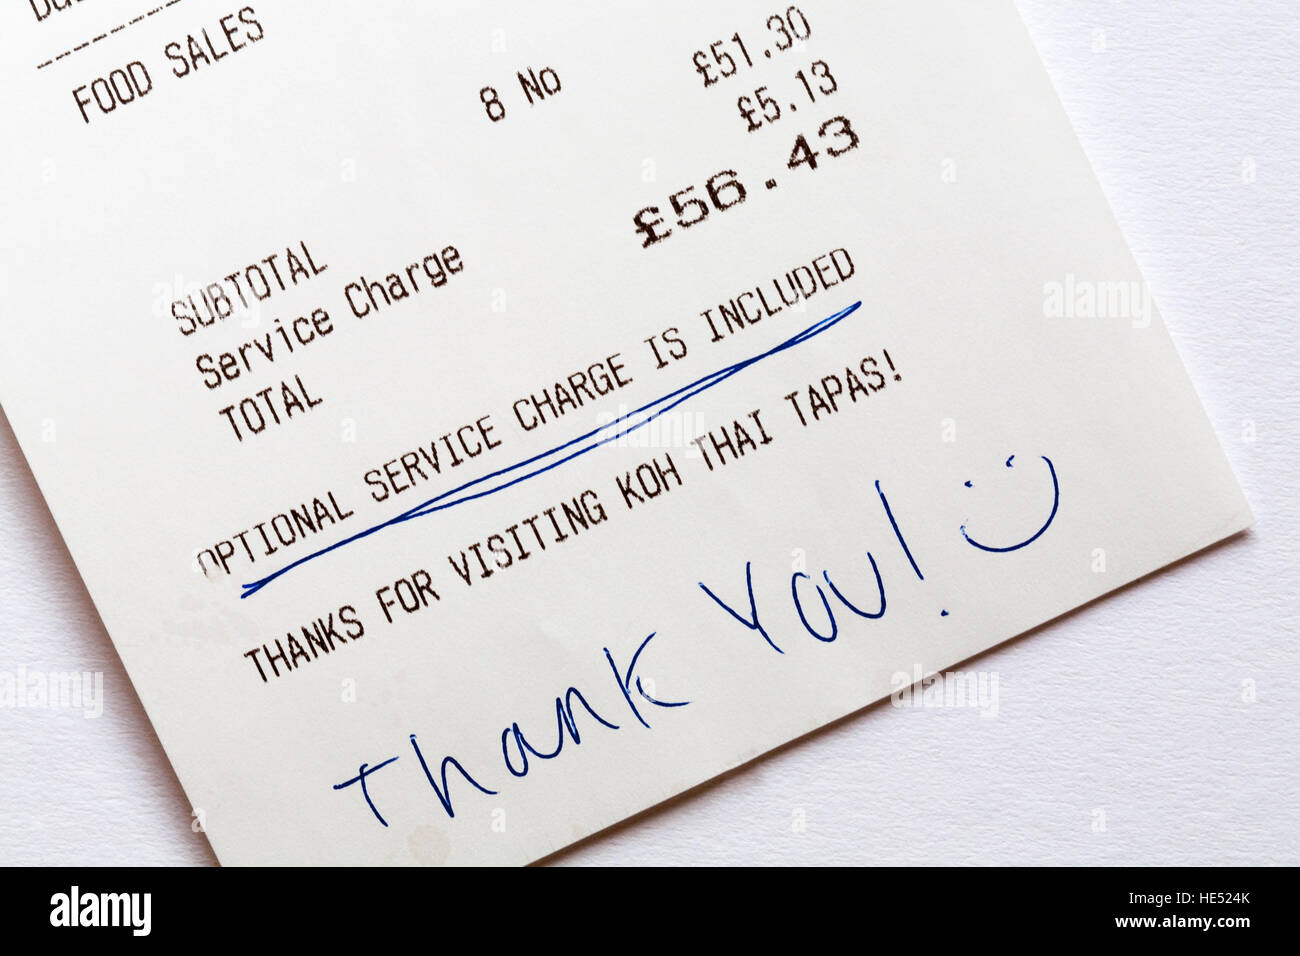 Optional service charge is included on restaurant bill with hand written thank you and smiley face Stock Photo